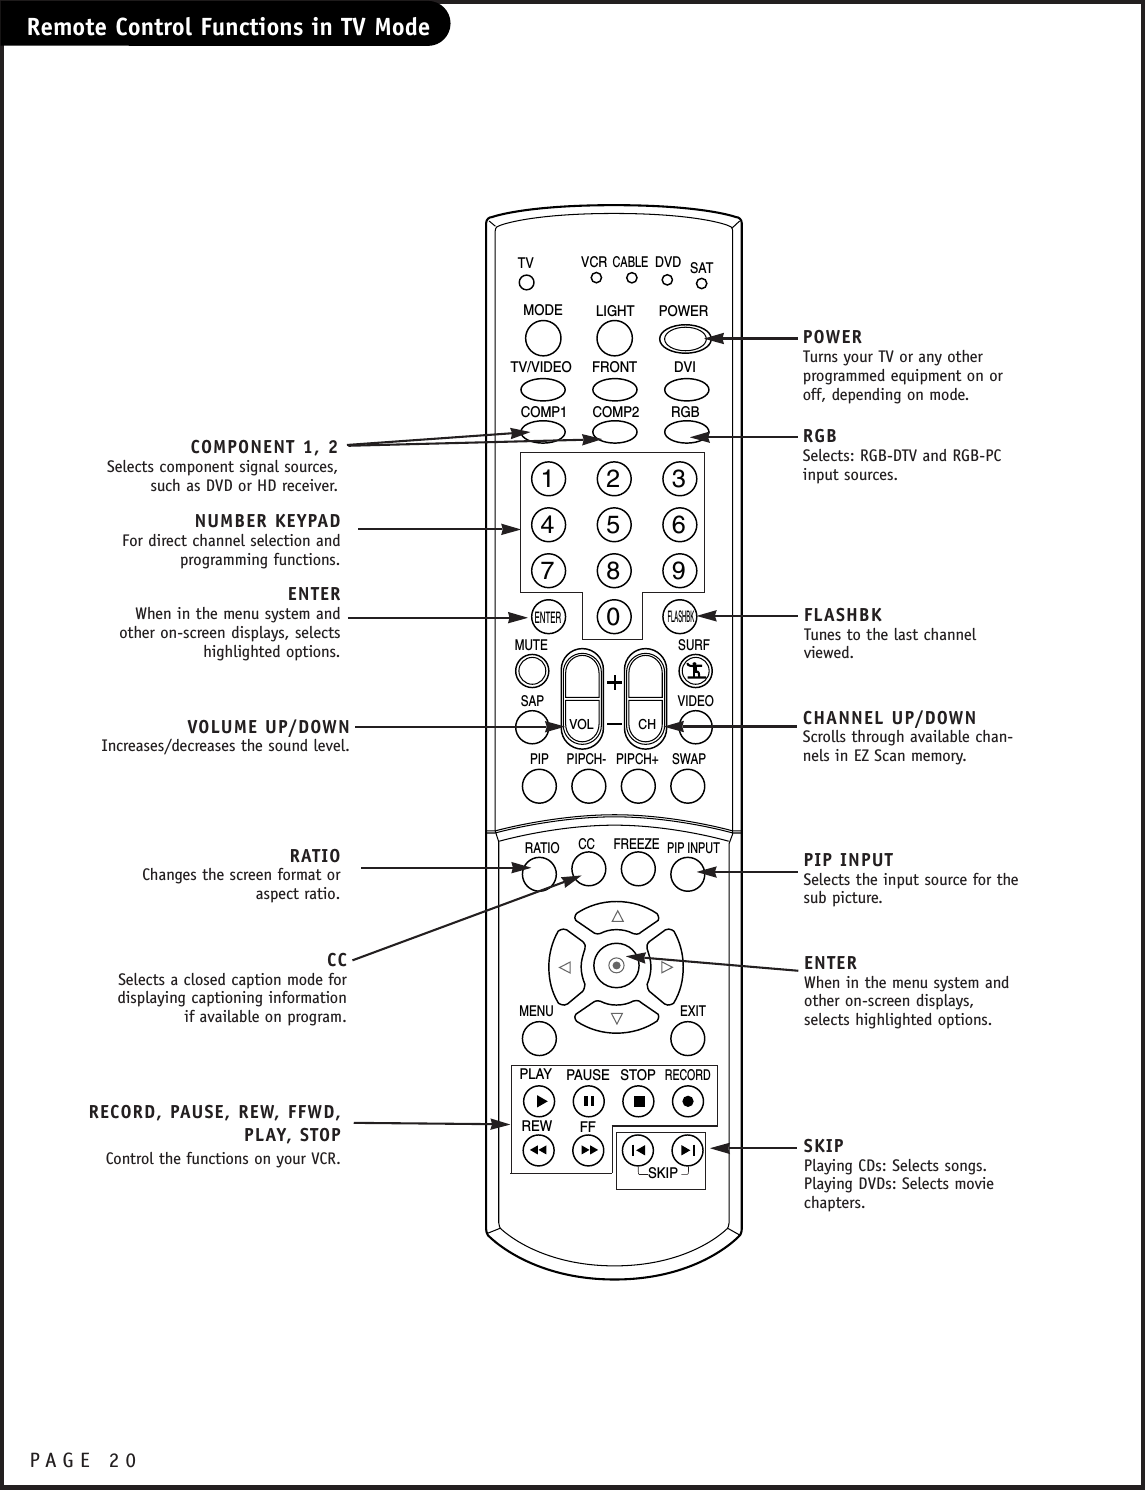 PAGE 20Remote Control Functions in TV Mode1234567890TVMODE LIGHT POWER   TV/VIDEO DVIRGBVCRCABLEDVD SATMUTESWAPPIPCH- PIPCH+PIPRATIORECORDSTOPPAUSEREWPLAYFFMENU EXITCC FREEZEPIP INPUTVOL CHSURFSAP VIDEOCOMP2COMP1FRONTSKIPENTERFLASHBKPOWERTurns your TV or any otherprogrammed equipment on oroff, depending on mode.CHANNEL UP/DOWNScrolls through available chan-nels in EZ Scan memory.NUMBER KEYPADFor direct channel selection and programming functions.ENTERWhen in the menu system andother on-screen displays,selects highlighted options.RECORD, PAUSE, REW, FFWD,PLAY, STOPControl the functions on your VCR.VOLUME UP/DOWNIncreases/decreases the sound level.RATIOChanges the screen format oraspect ratio.SKIPPlaying CDs: Selects songs.Playing DVDs: Selects moviechapters.COMPONENT 1, 2Selects component signal sources,such as DVD or HD receiver.ENTERWhen in the menu system andother on-screen displays, selectshighlighted options.FLASHBKTunes to the last channelviewed.CCSelects a closed caption mode fordisplaying captioning informationif available on program.PIP INPUTSelects the input source for thesub picture.RGBSelects: RGB-DTV and RGB-PCinput sources.